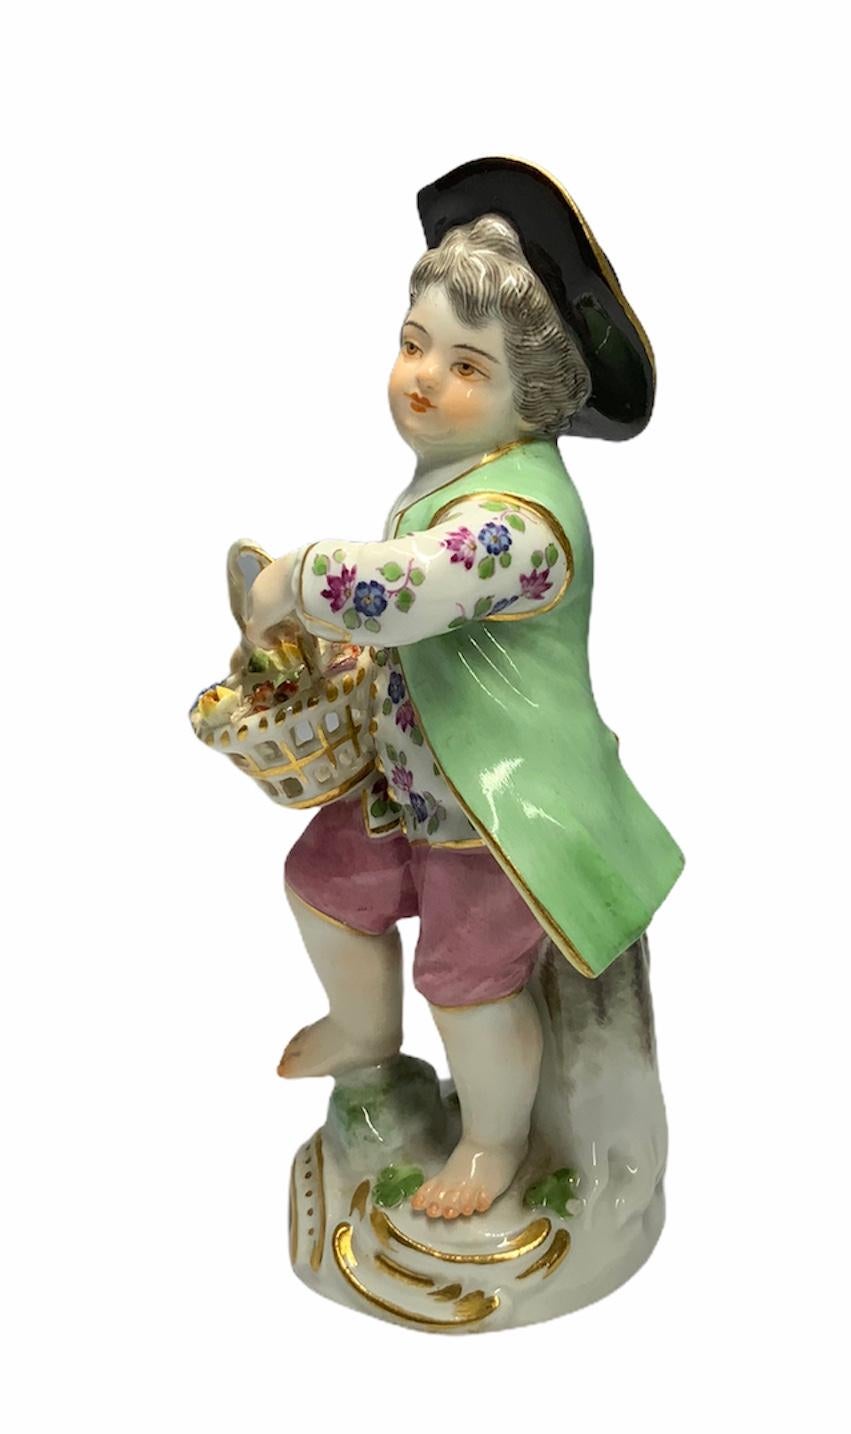 This a Meissen porcelain figure depicting a boy dressed with colorful clothes and wearing a black hat. He appears to be gathering flowers in a basket. He is standing in front of a tree trunk. Under a gilt white rocaille base appears the Meissen